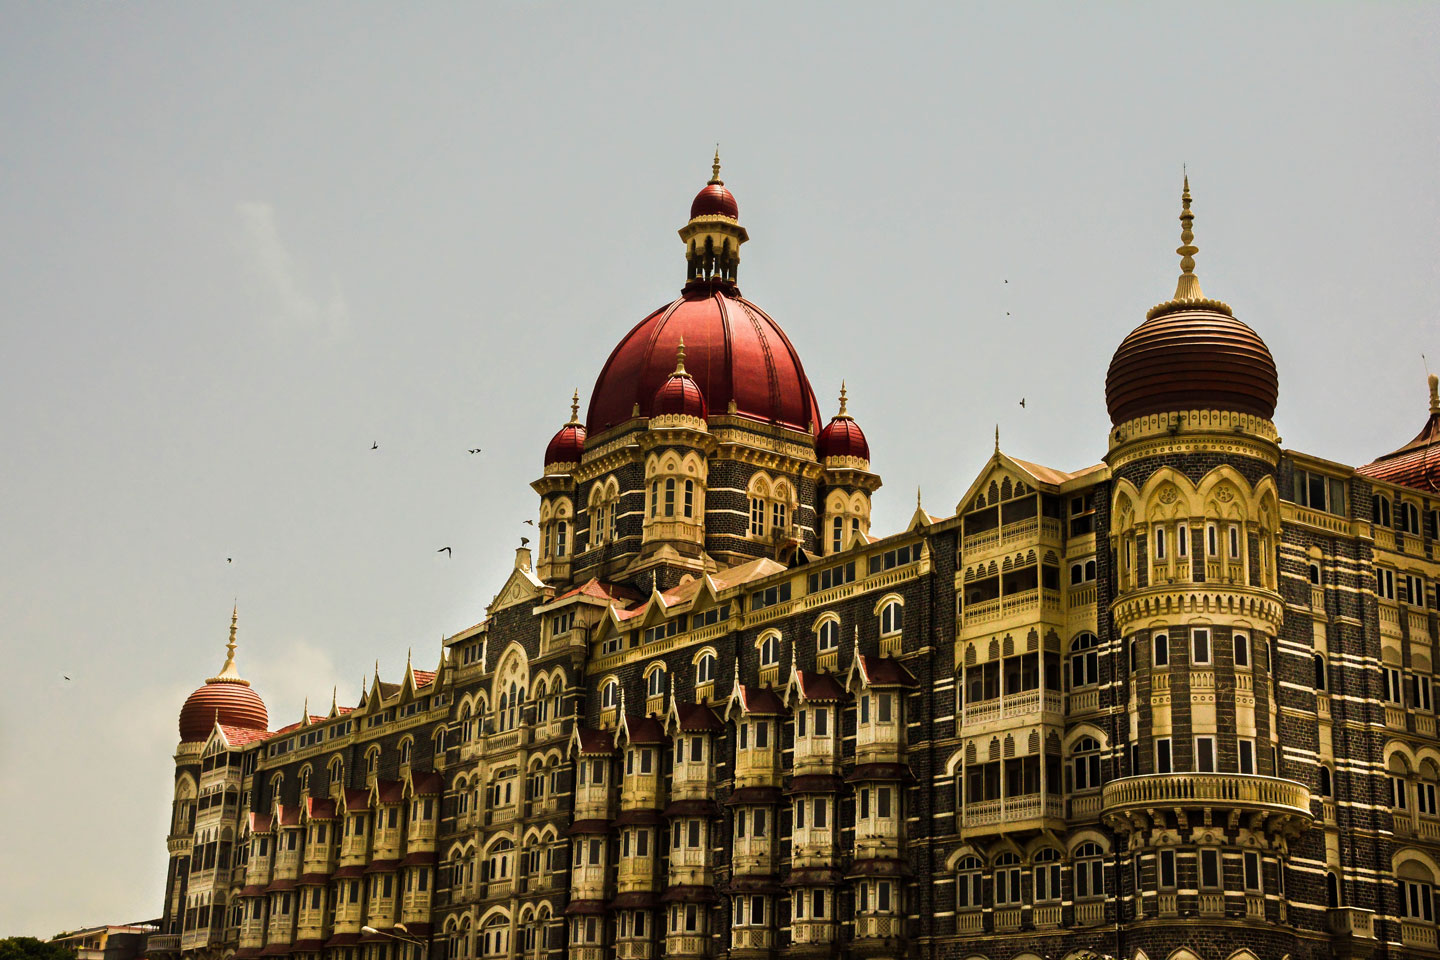 The Taj Mahal Palace Hotel, Mumbai, where the first Dior boutique was opened in 2010